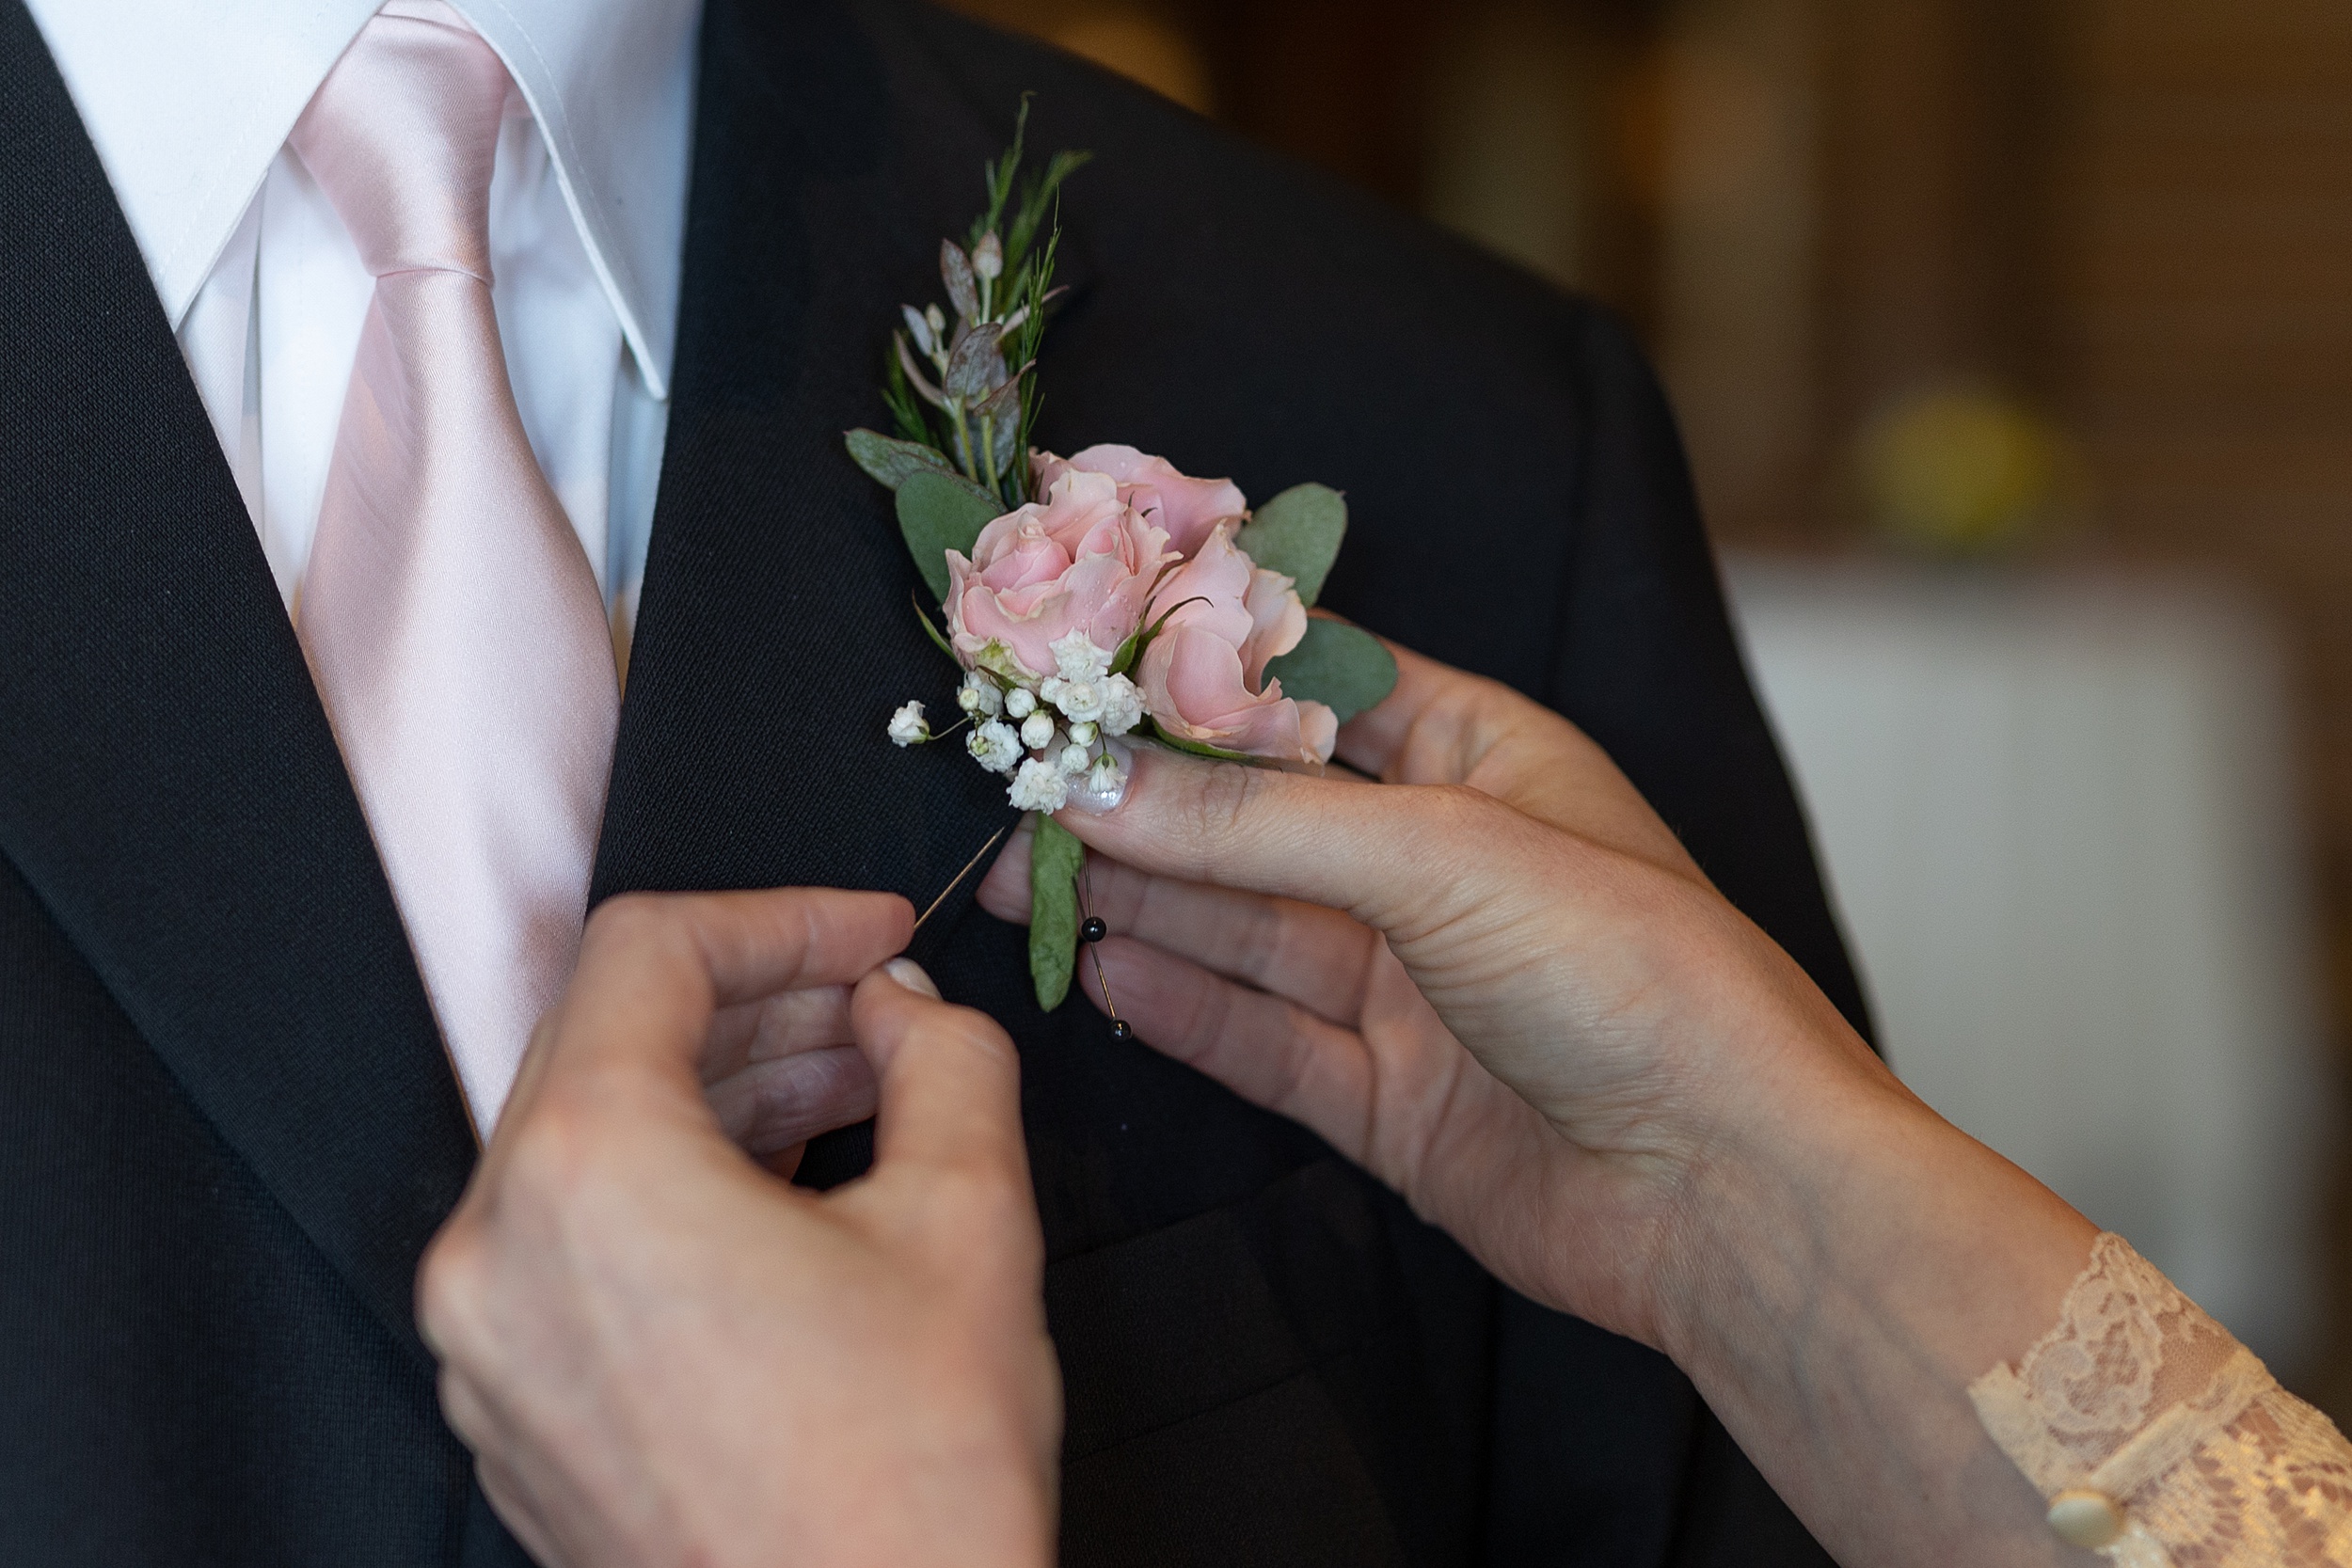 Detail of mother pinning a corsage onto the groom in a pink tie